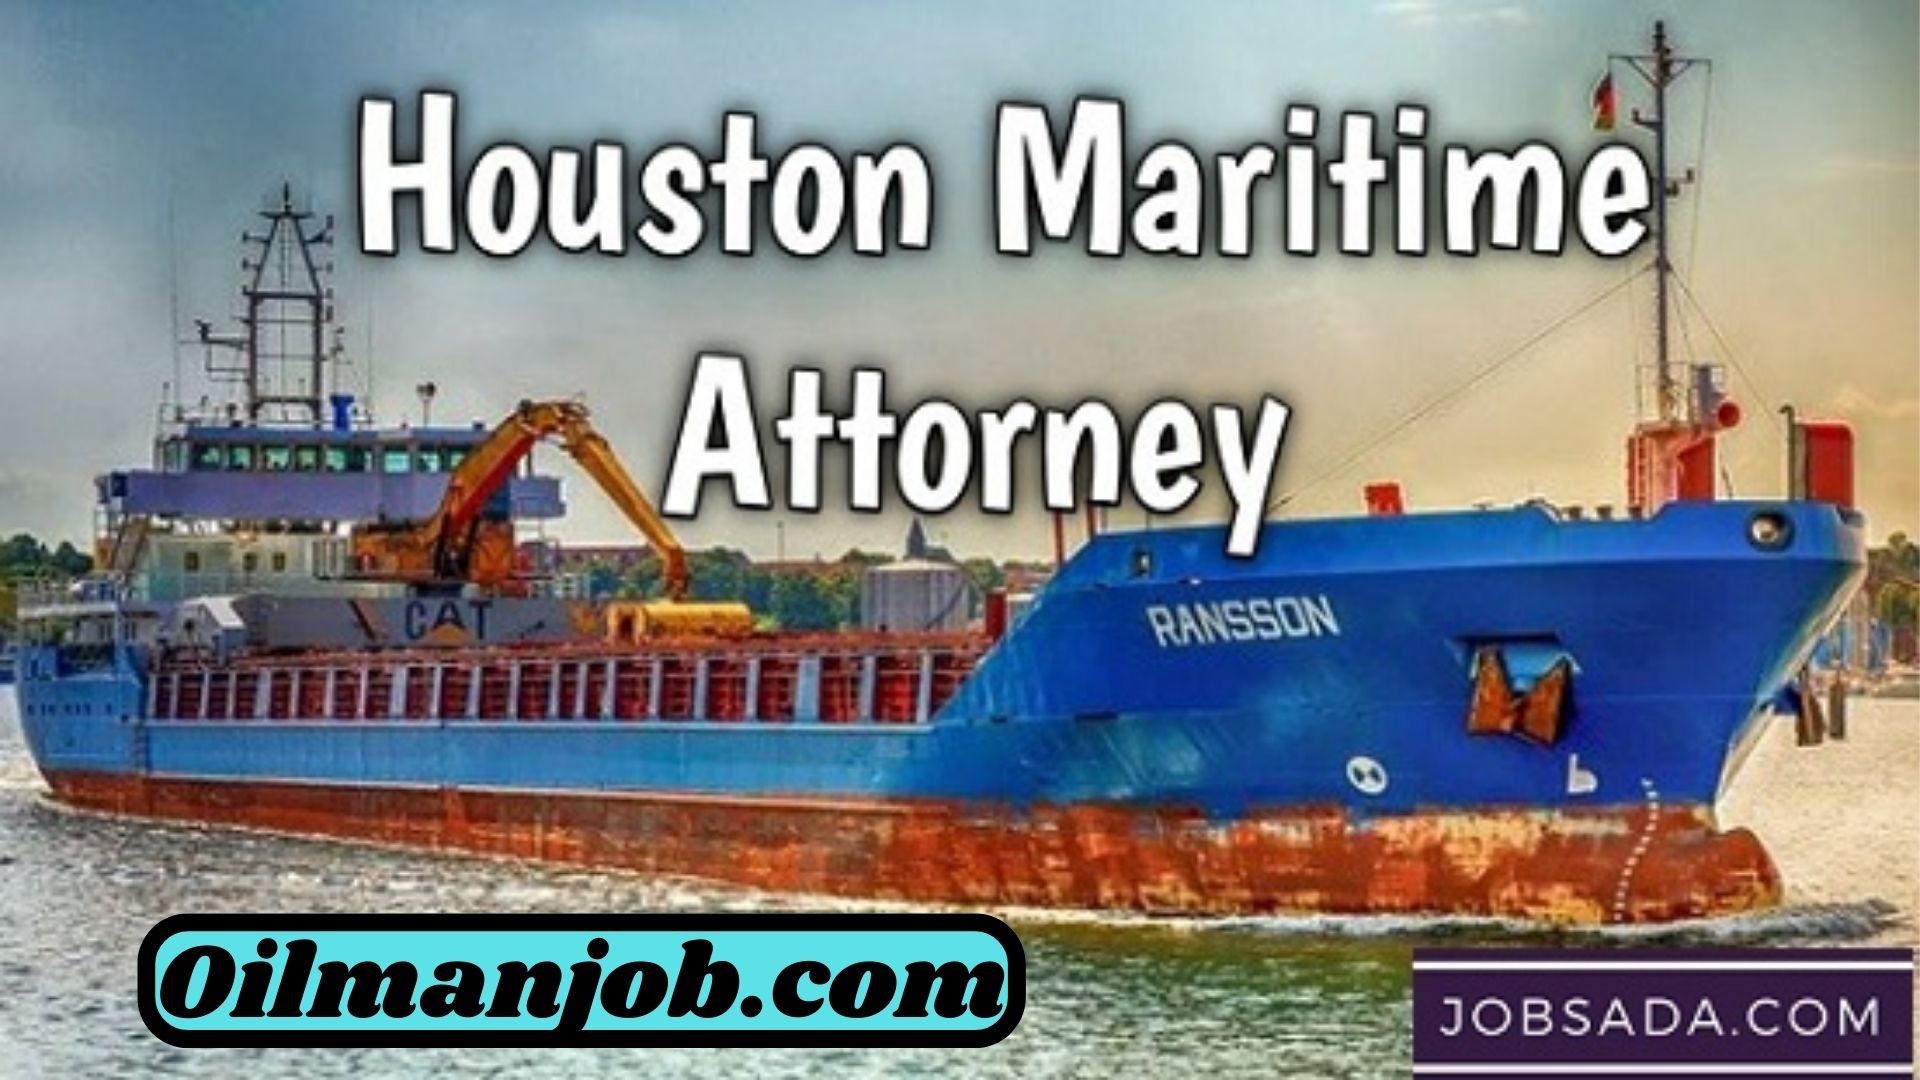 Houston Maritime Attorney: Protecting the Rights of Seafarers and Maritime Workers